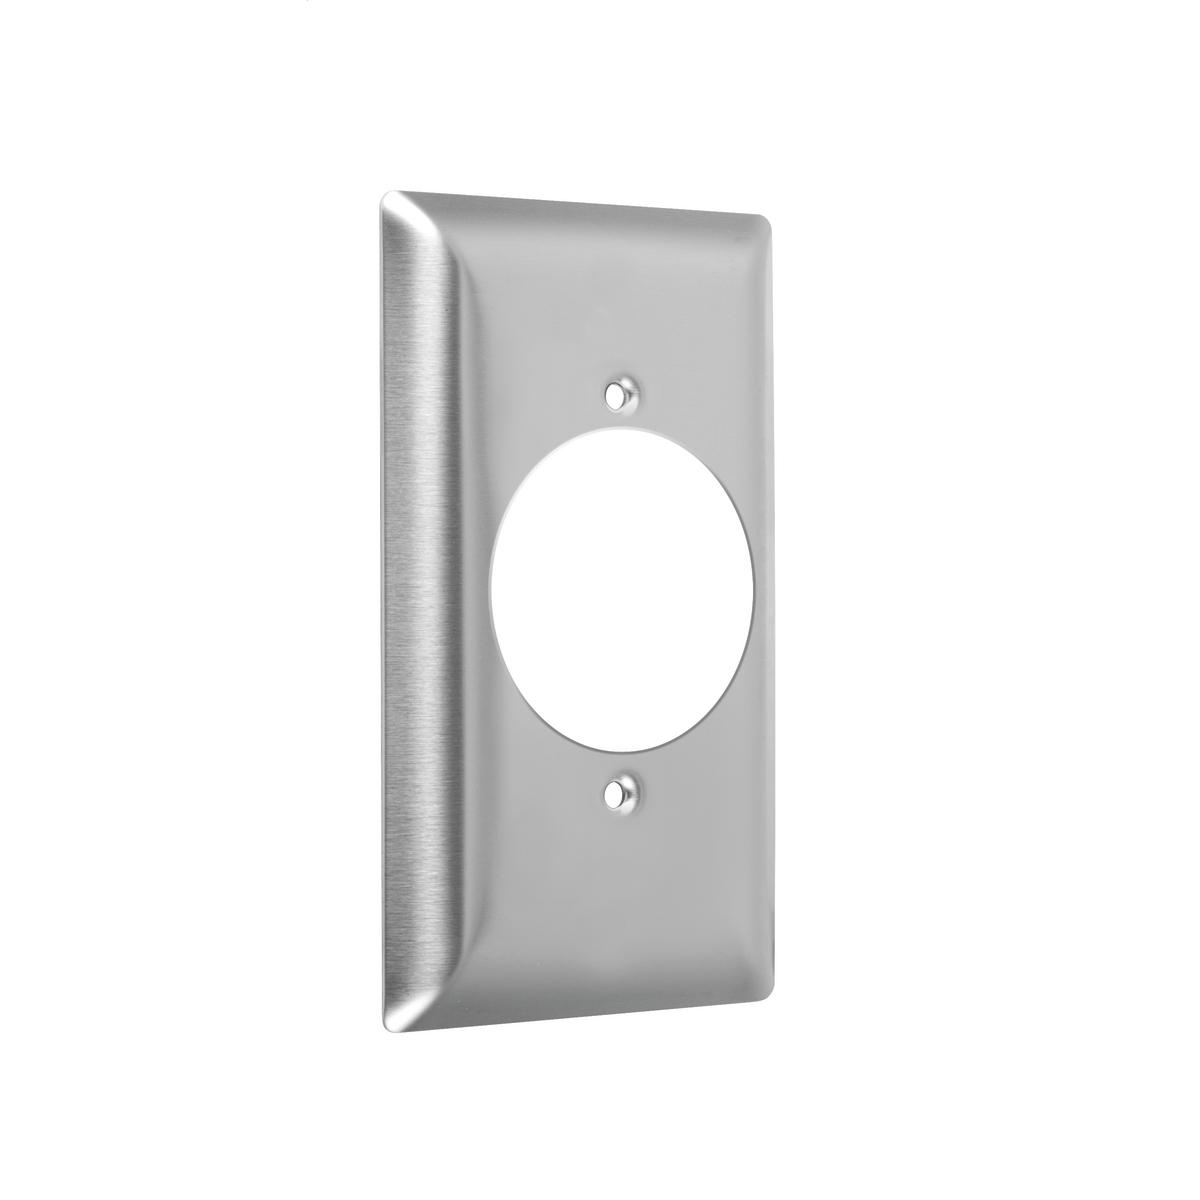 Hubbell WSS1-2 1-Gang Metal Wallplate, Standard, Single Receptacle 2.15 in., Stainless Steel  ; Easily primed and painted to match or complement walls. ; Won't bow, crack or distort during installation. ; Premium North American powder coat. ; Includes screw(s) in matchi